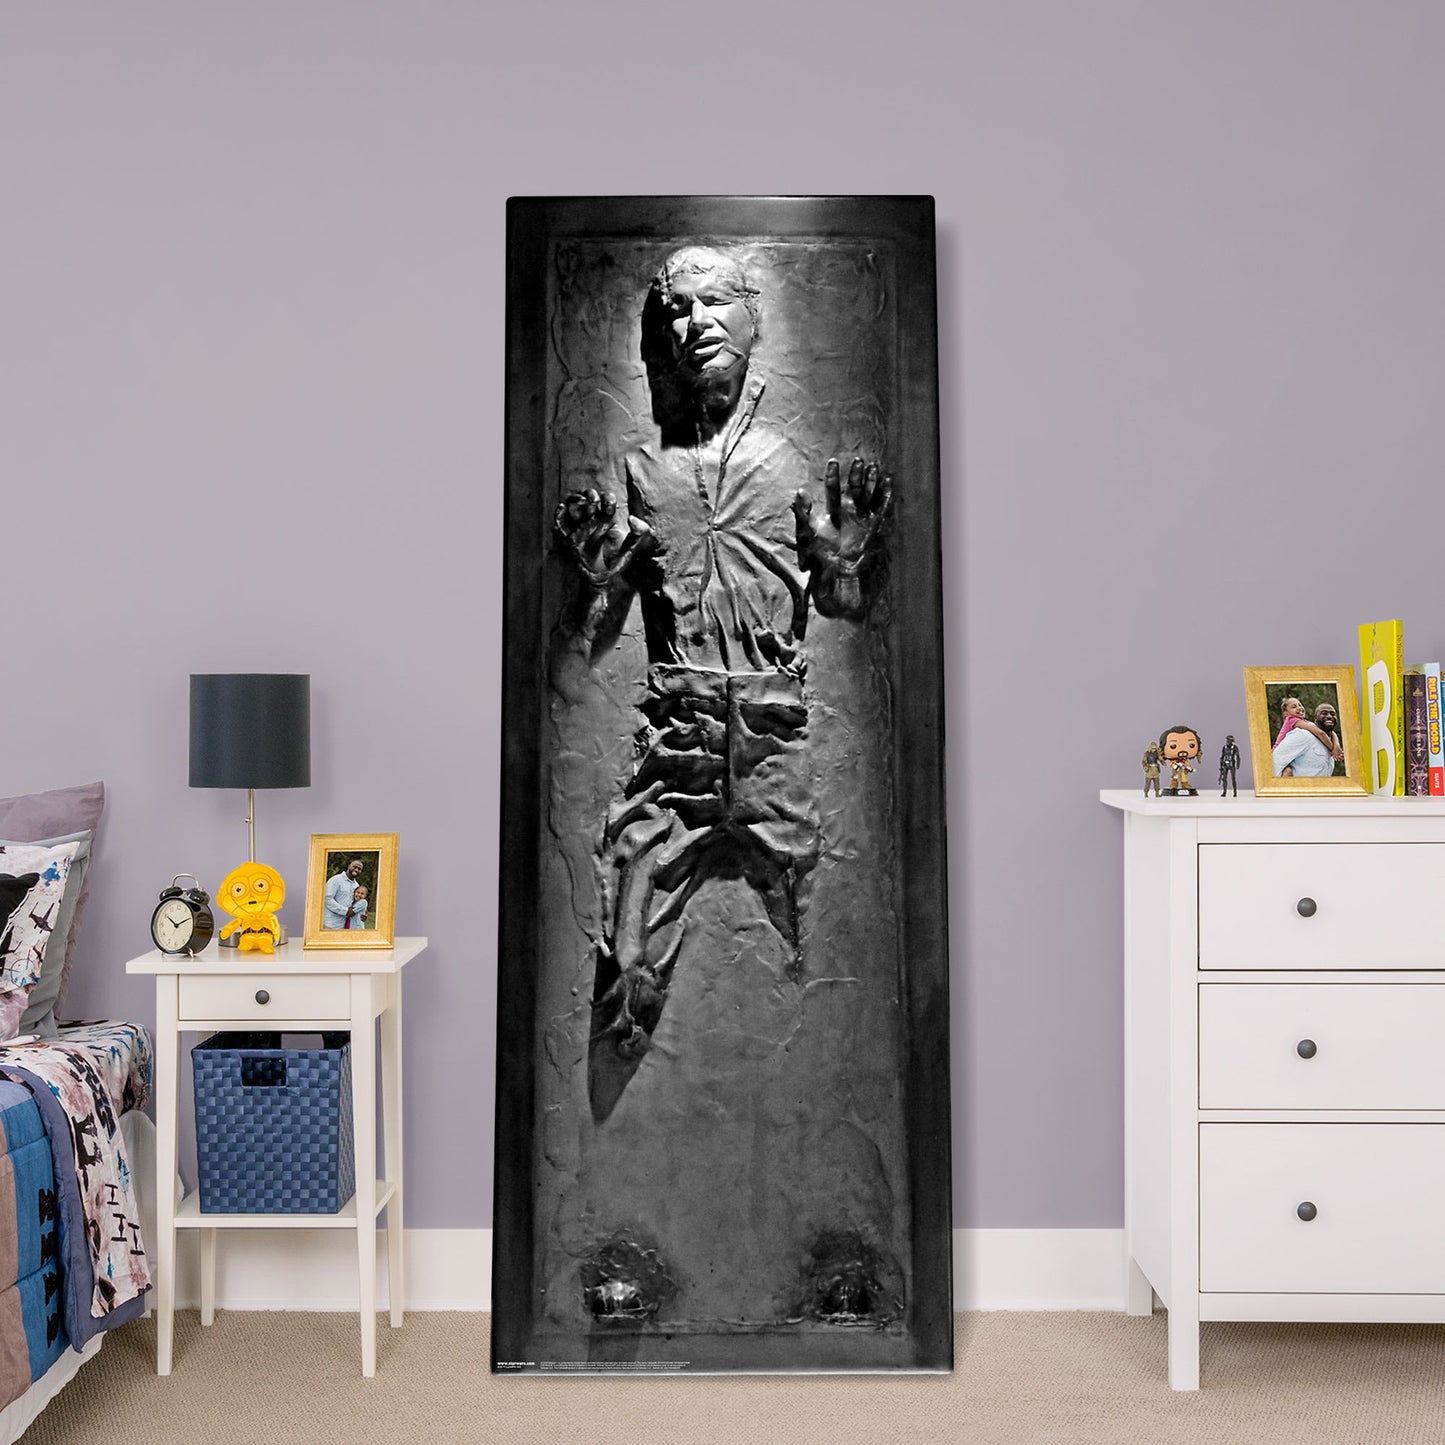 Han Solo In Carbonite   Foam Core Cutout  - Officially Licensed Star Wars    Stand Out